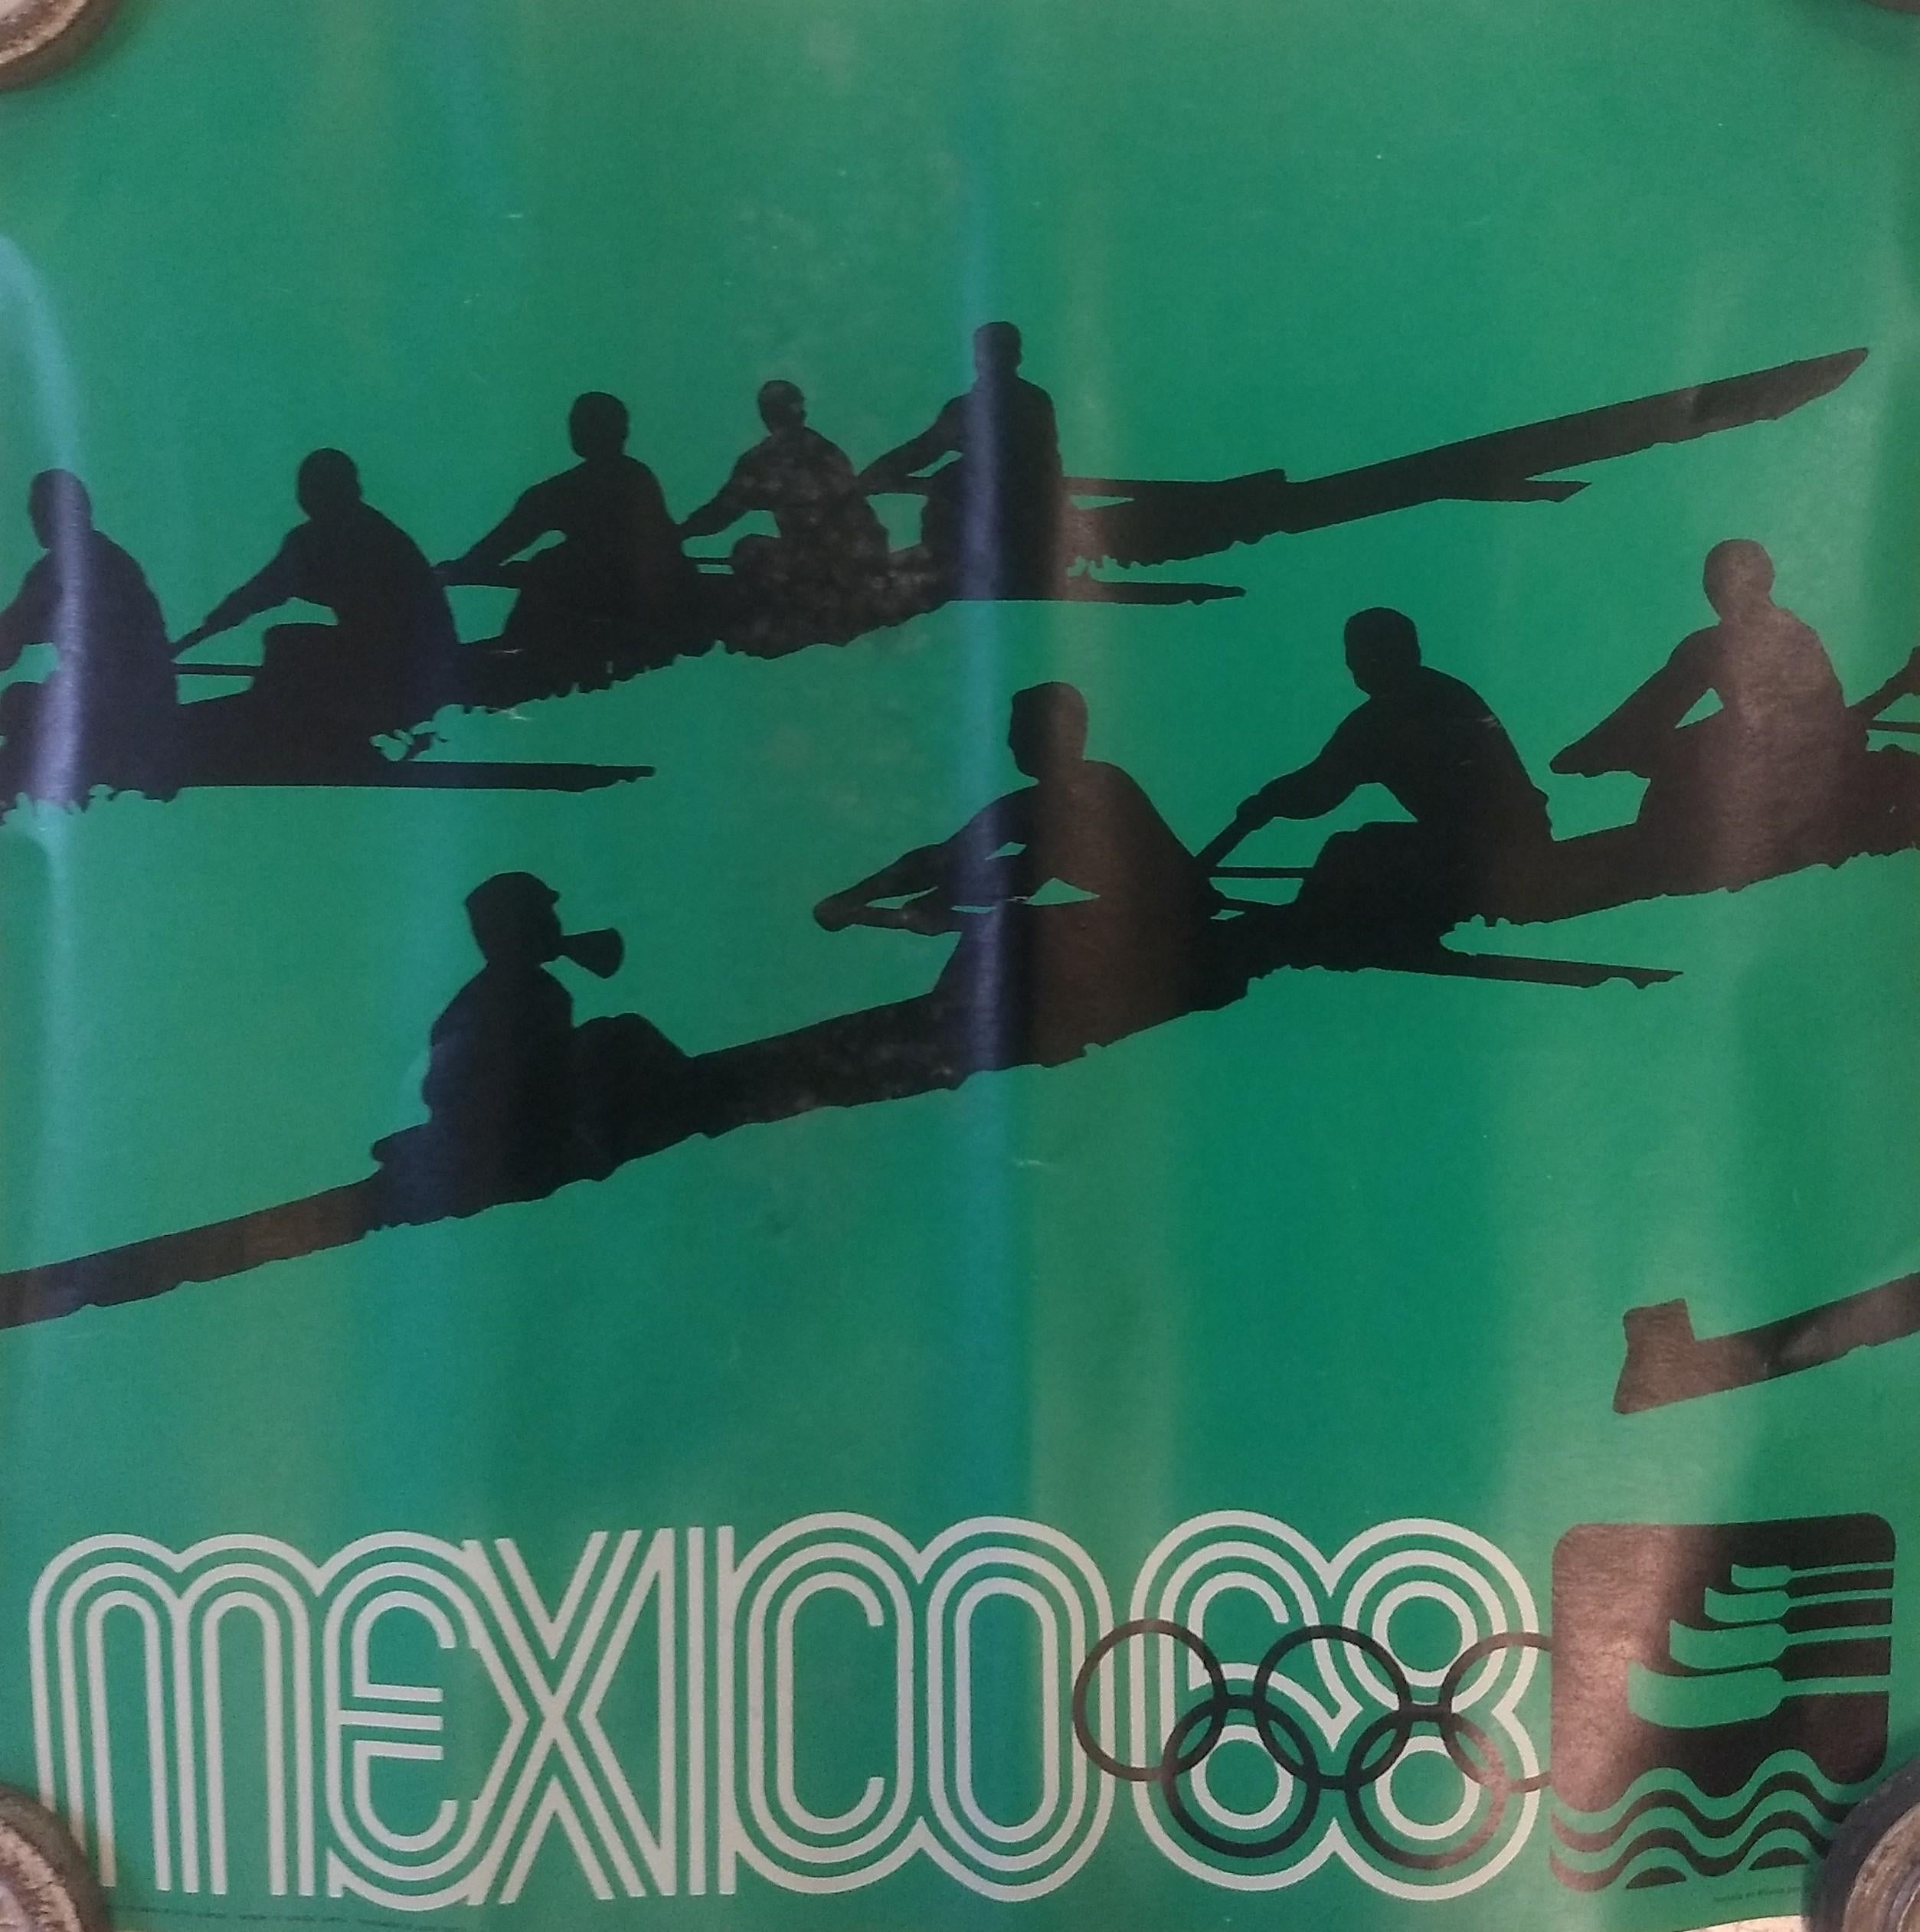 Mexican Mexico 68 Olympics Original Posters with Pictograms for Each Sport Discipline For Sale